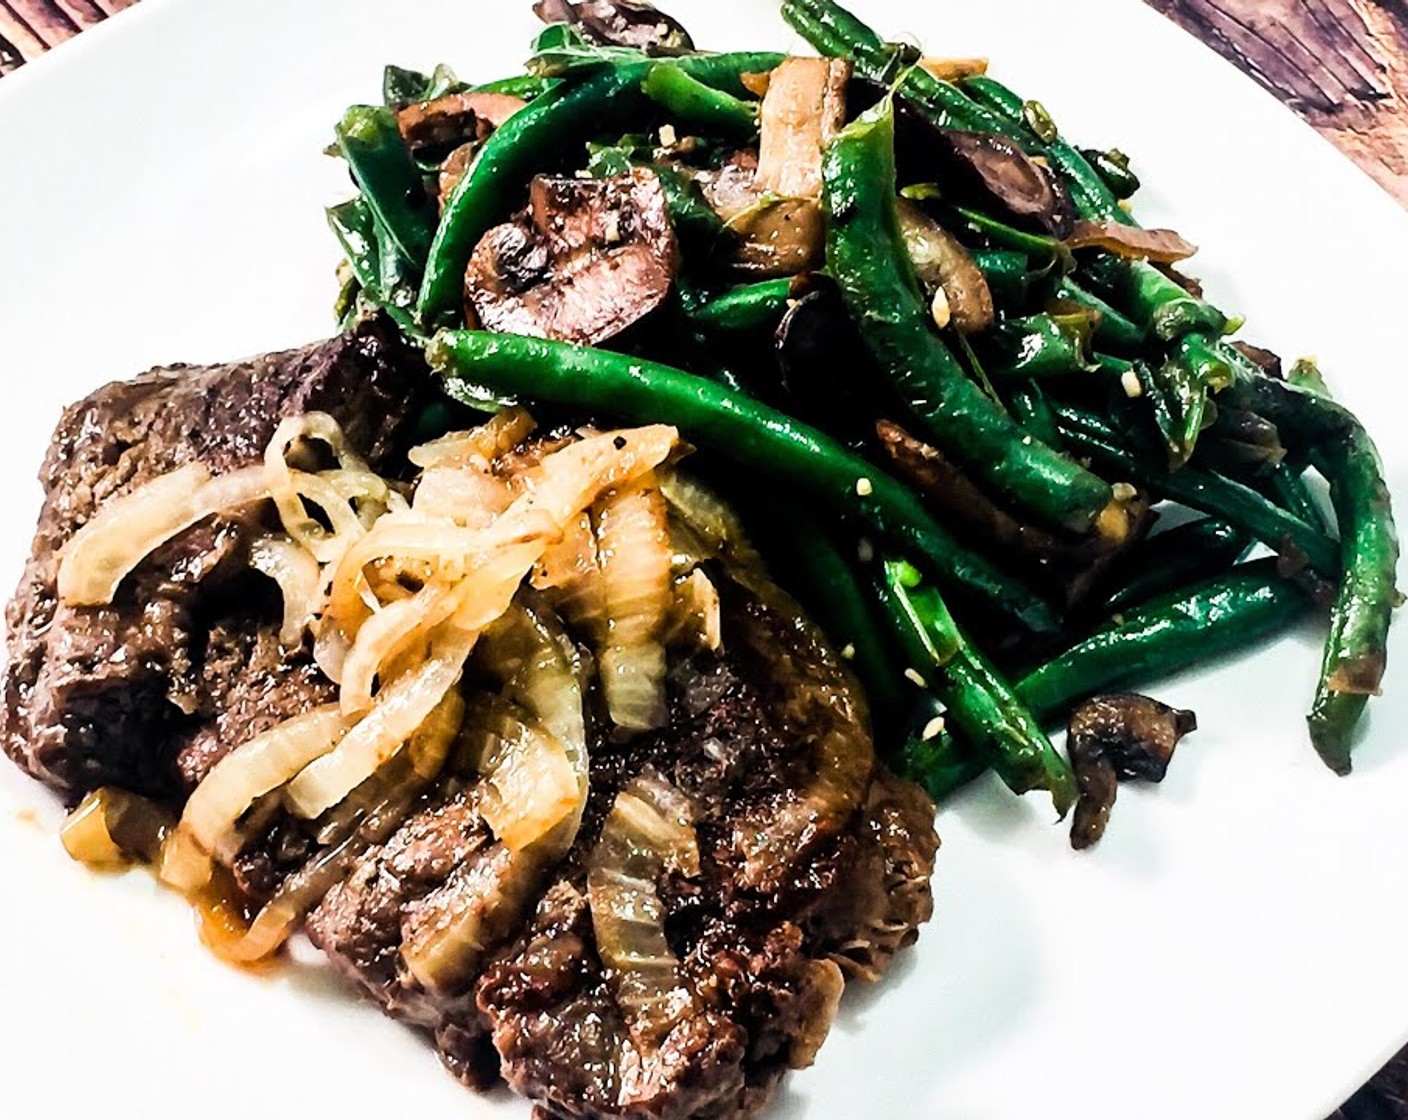 Fork Tender Steak with Green Beans and Mushrooms